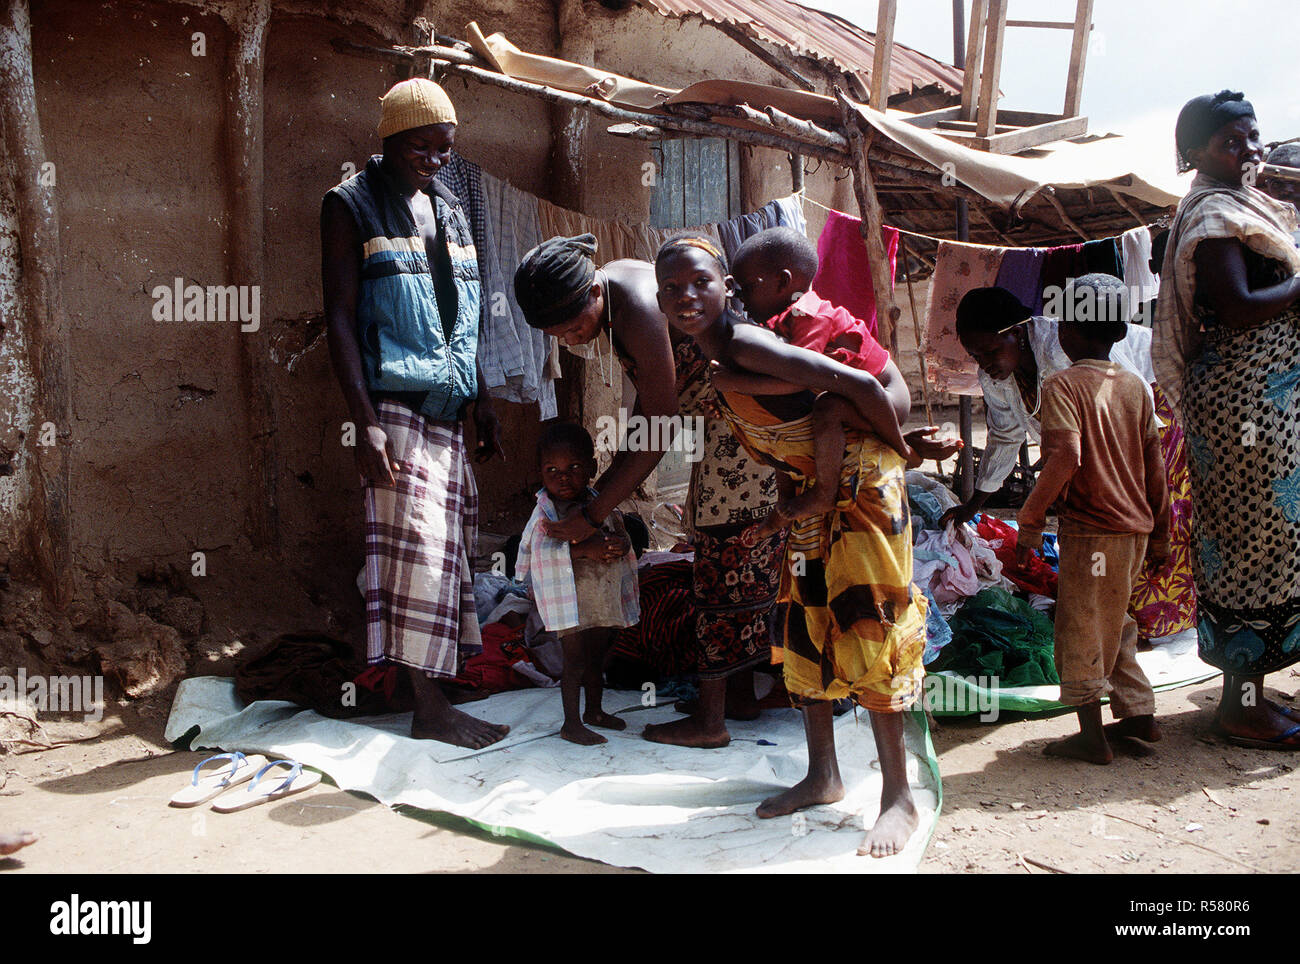 1993 - A little child tries on a shirt in the market in Mogambo village in Somalia during operation Continue Hope. Stock Photo